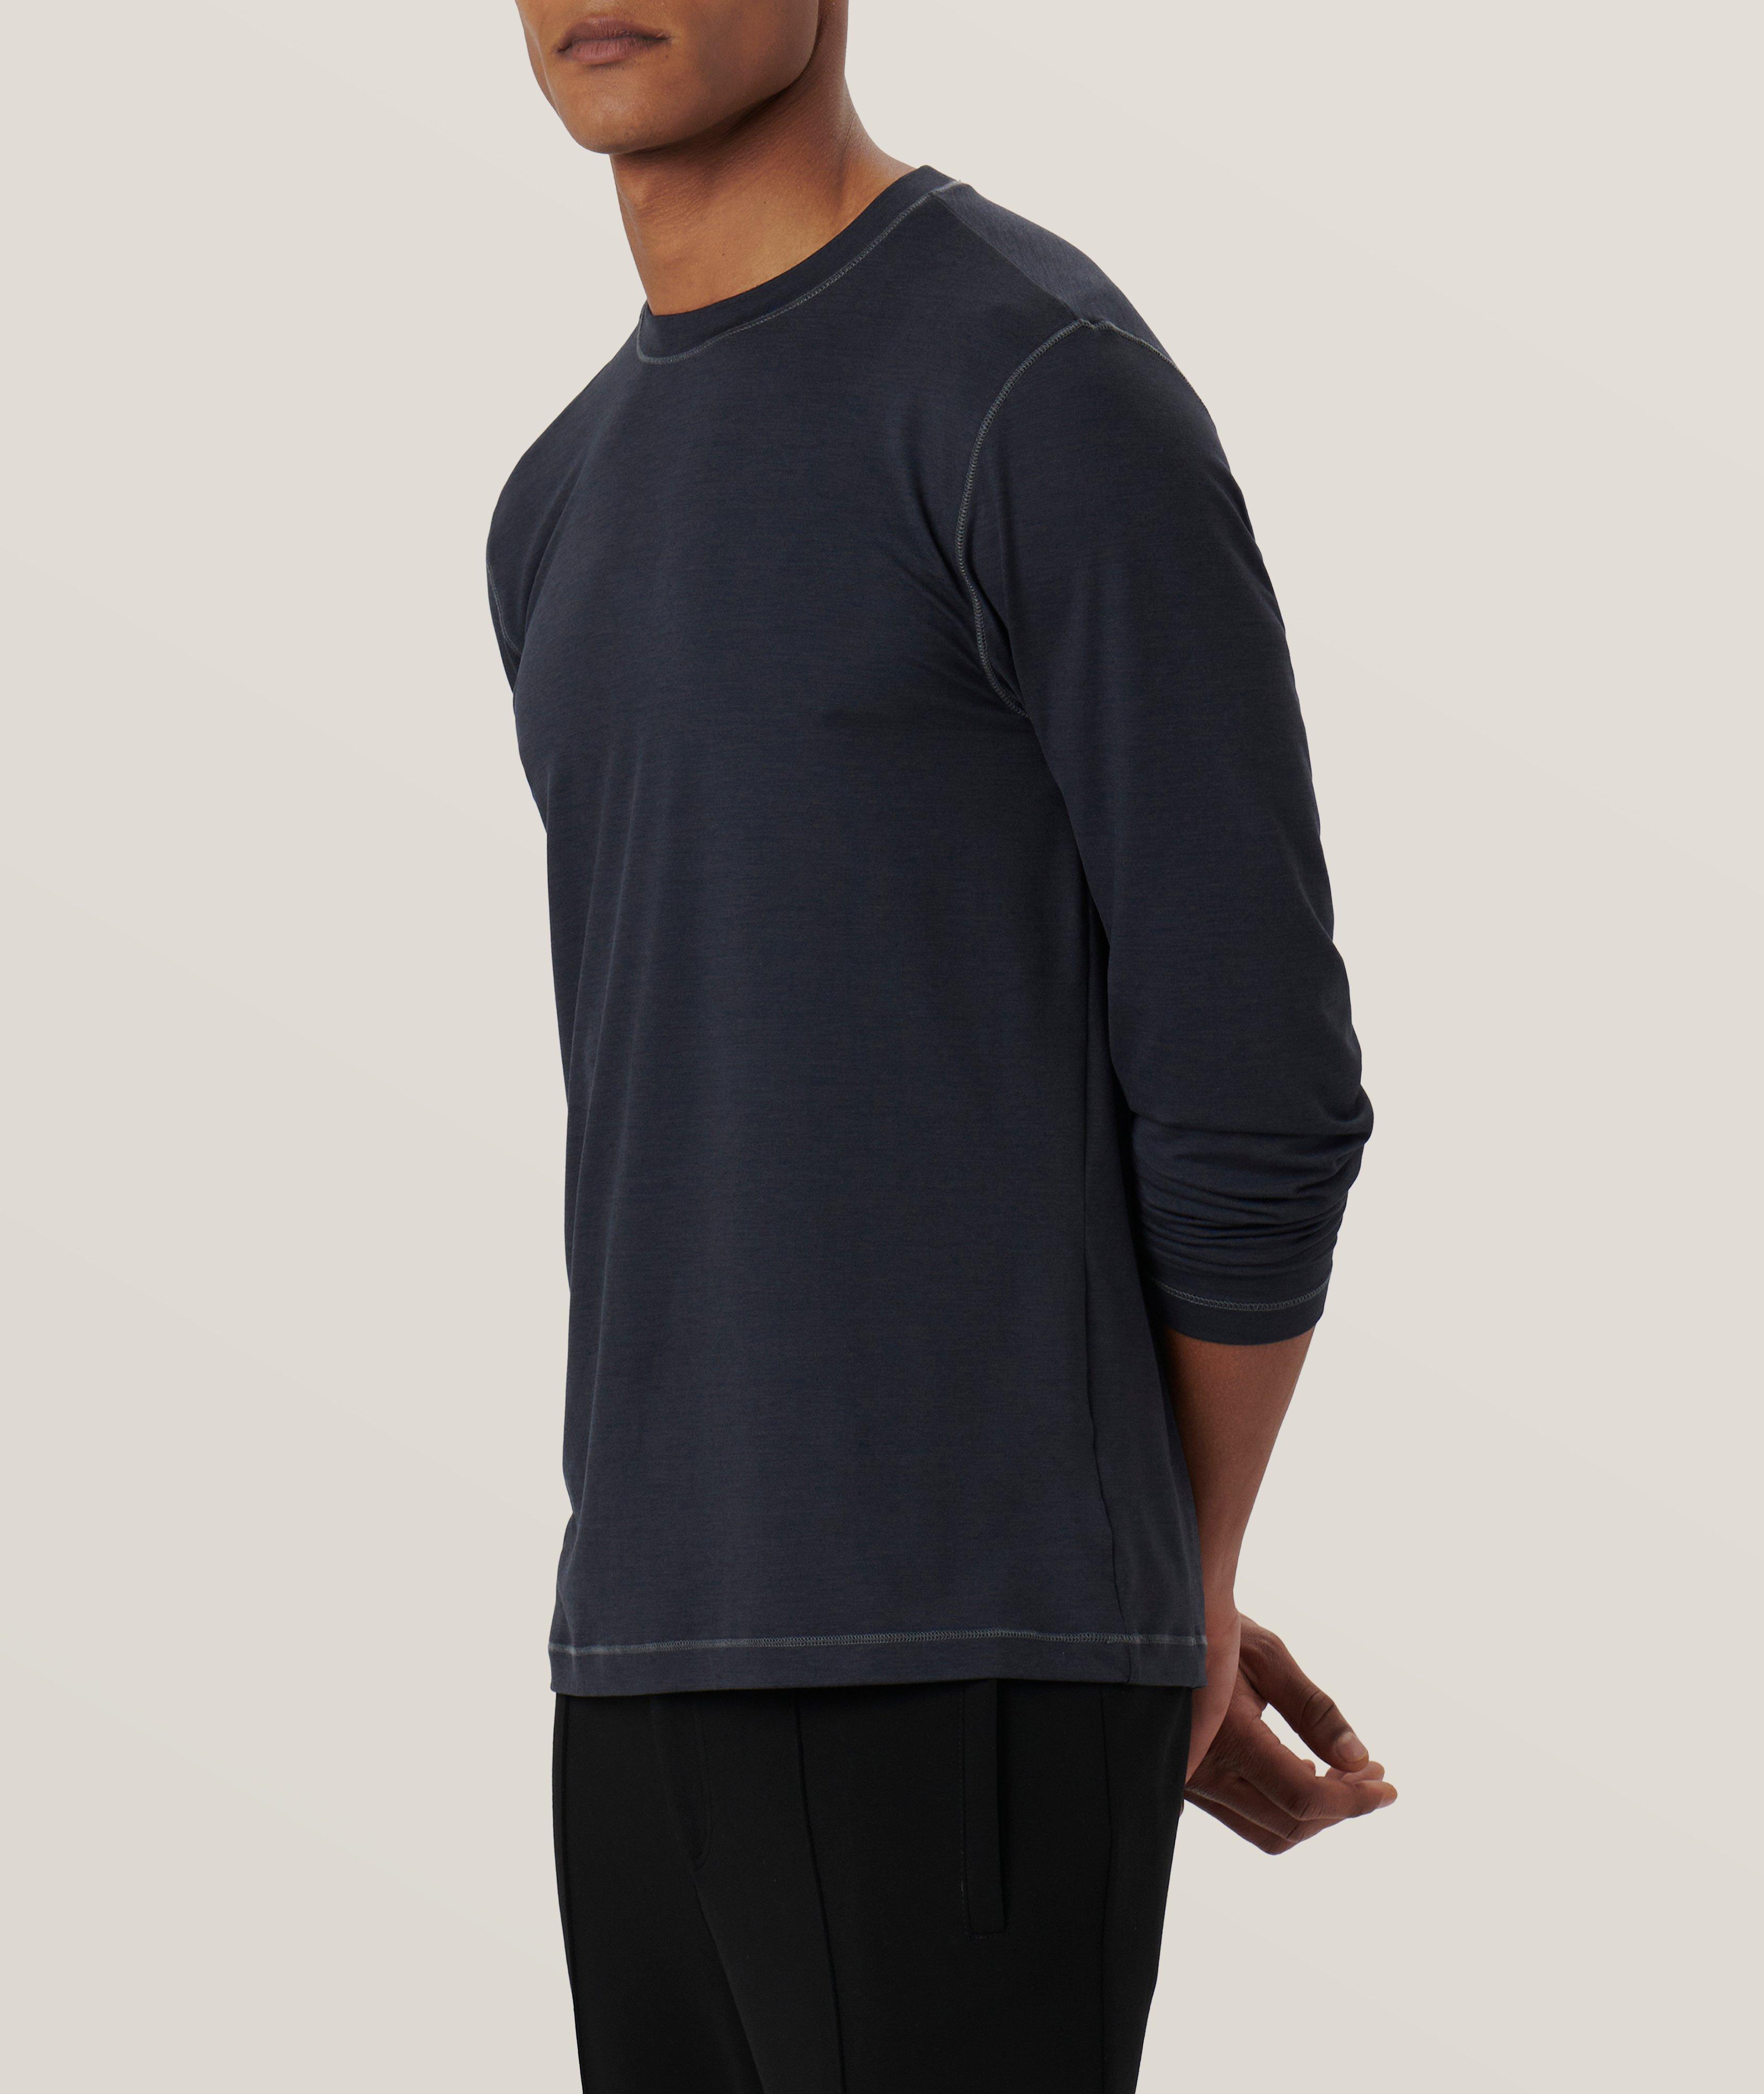 4-Way Stretch UV50 Performance Pullover image 4